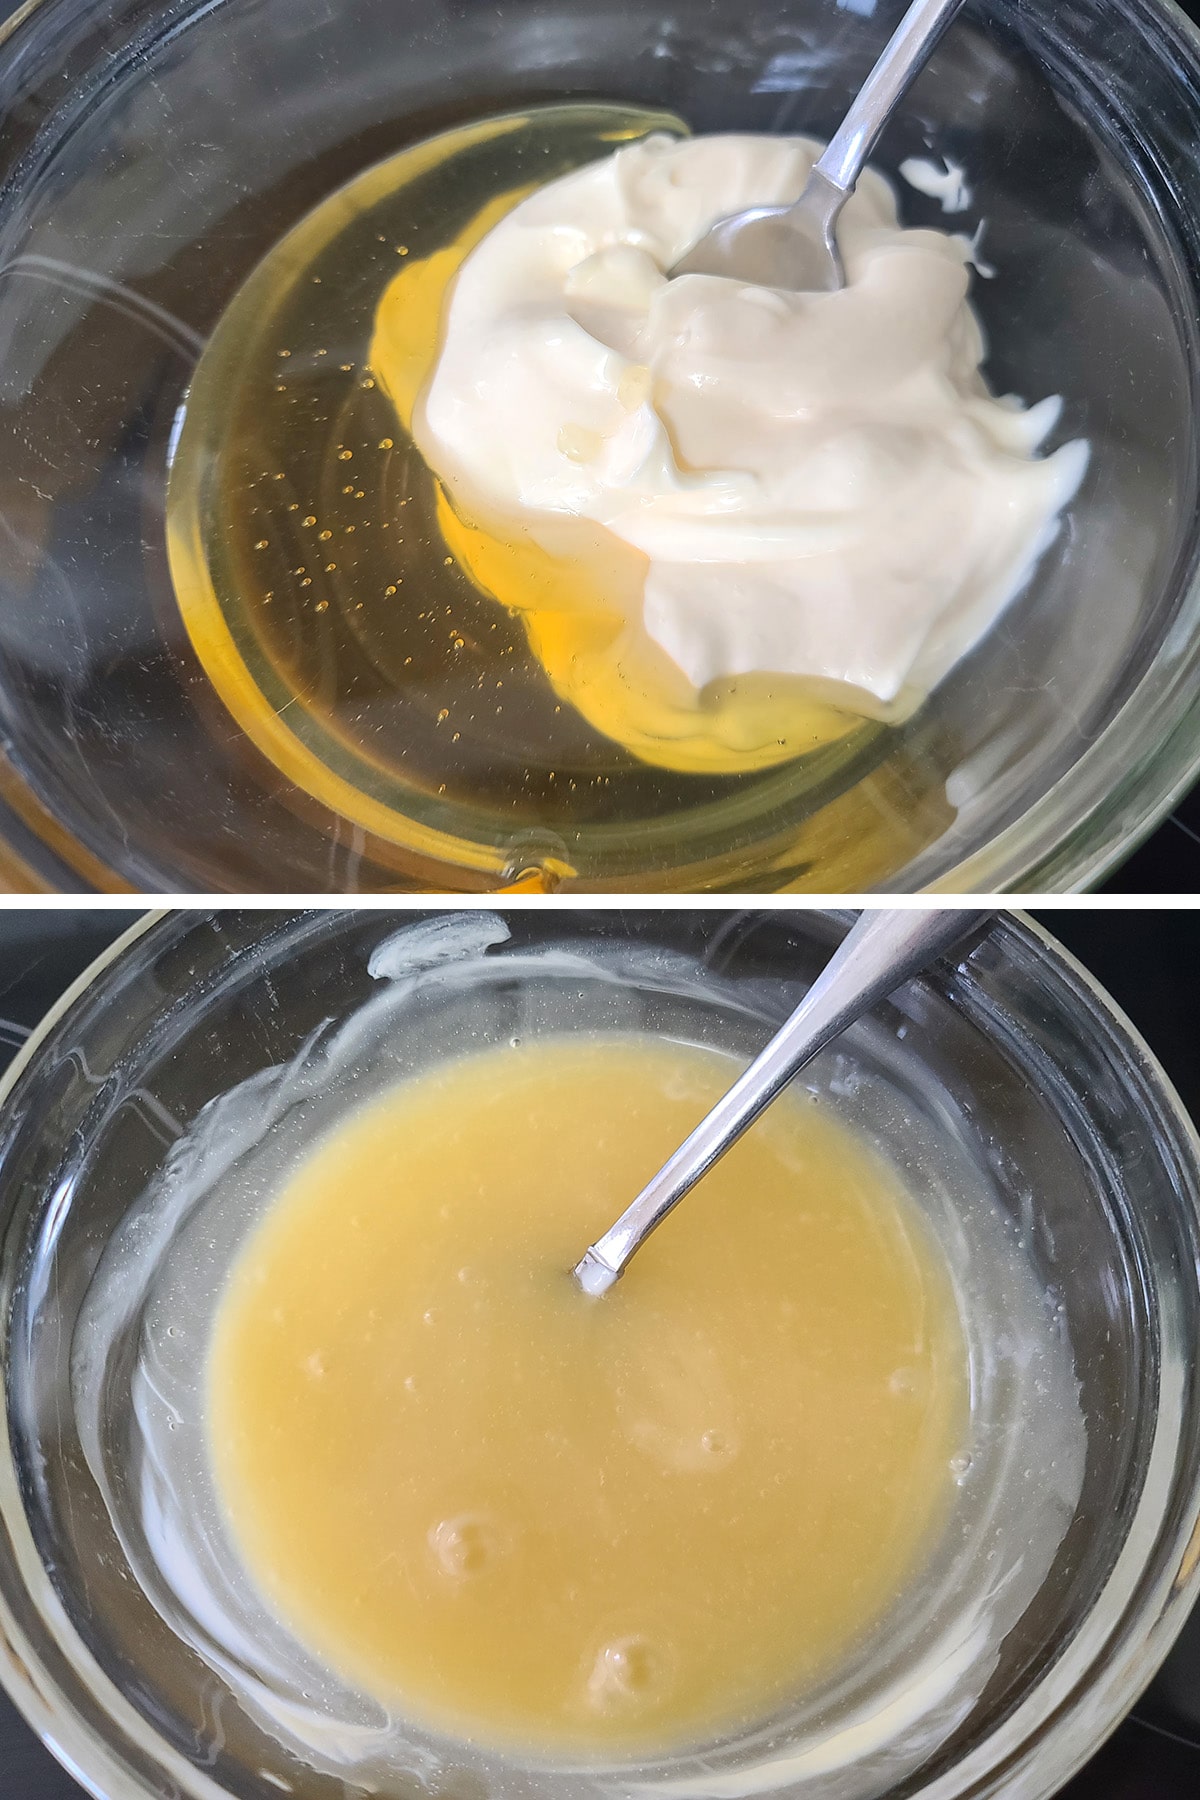 A two part image showing liquid honey and mayonnaise measured info a glass bowl, then mixed together until smooth.